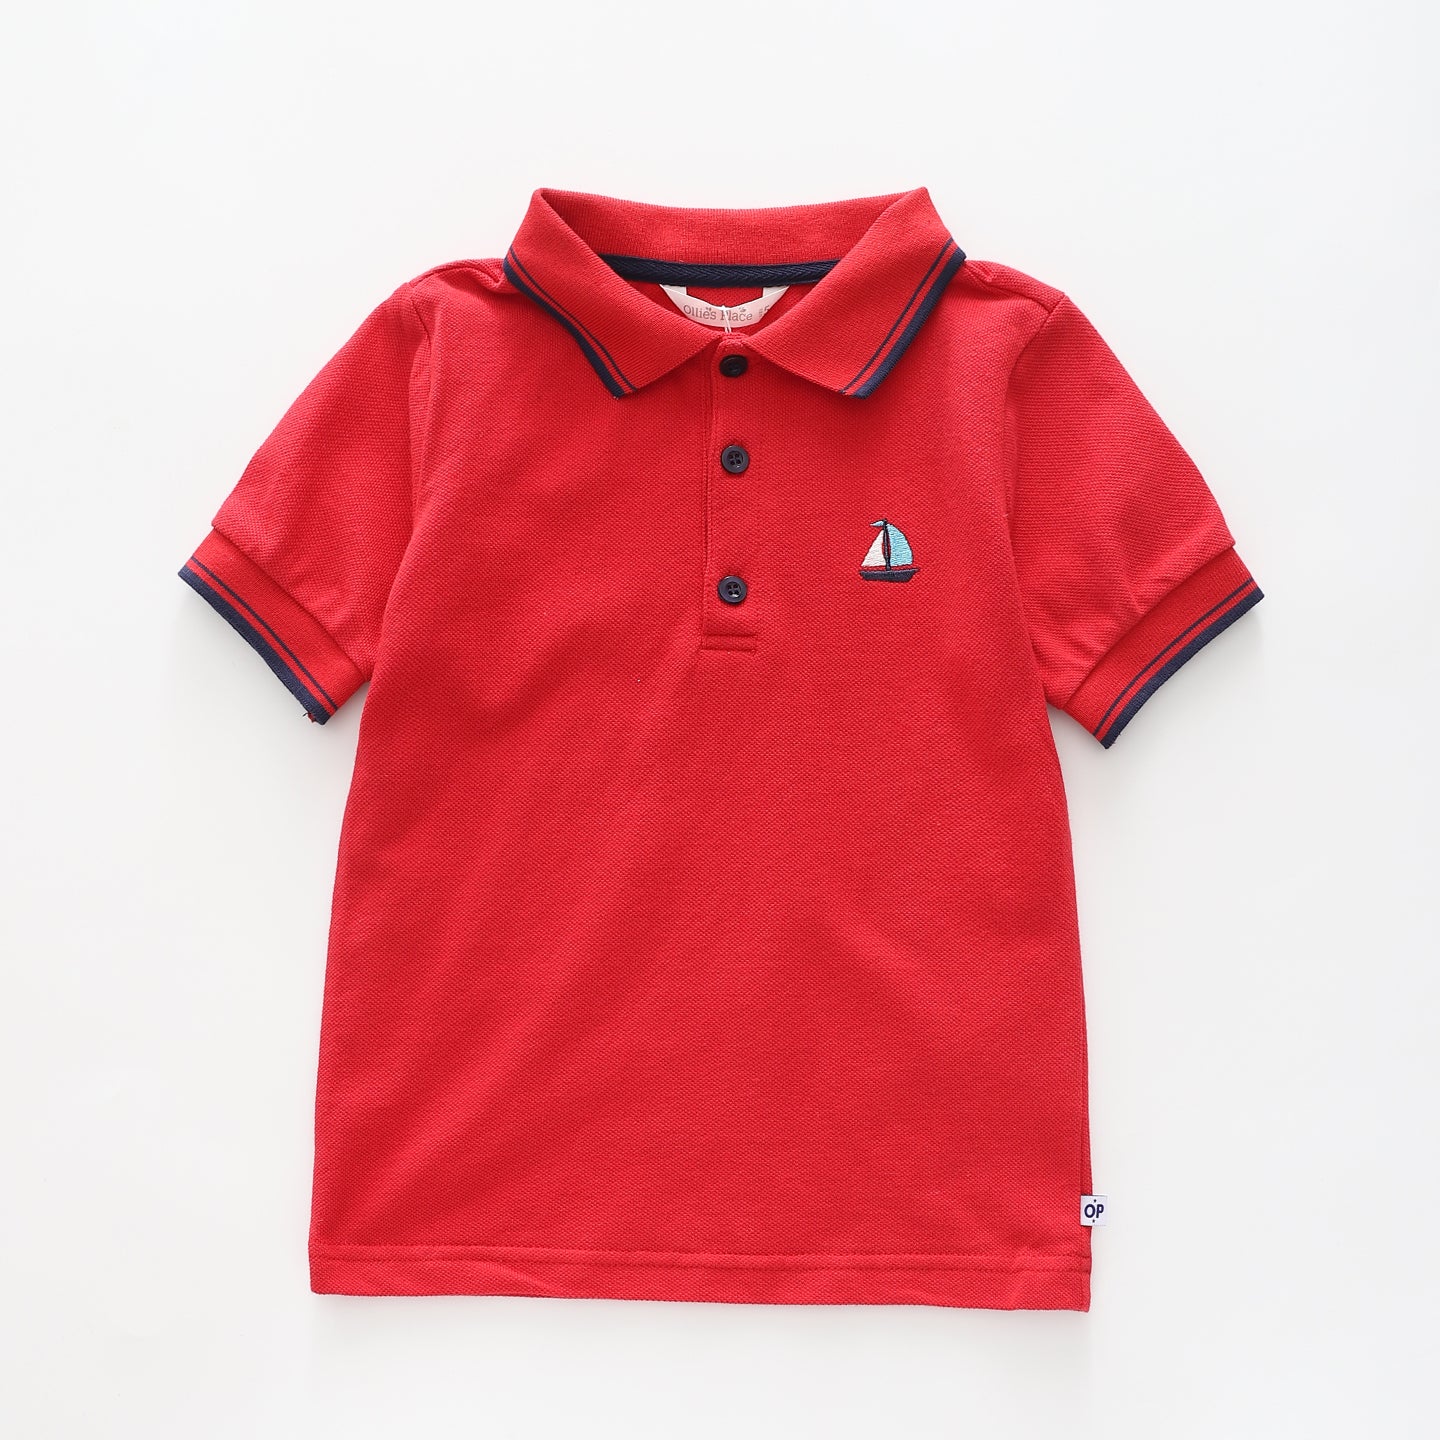 Boy's Red Polo Shirt With Sailboat Embroidery